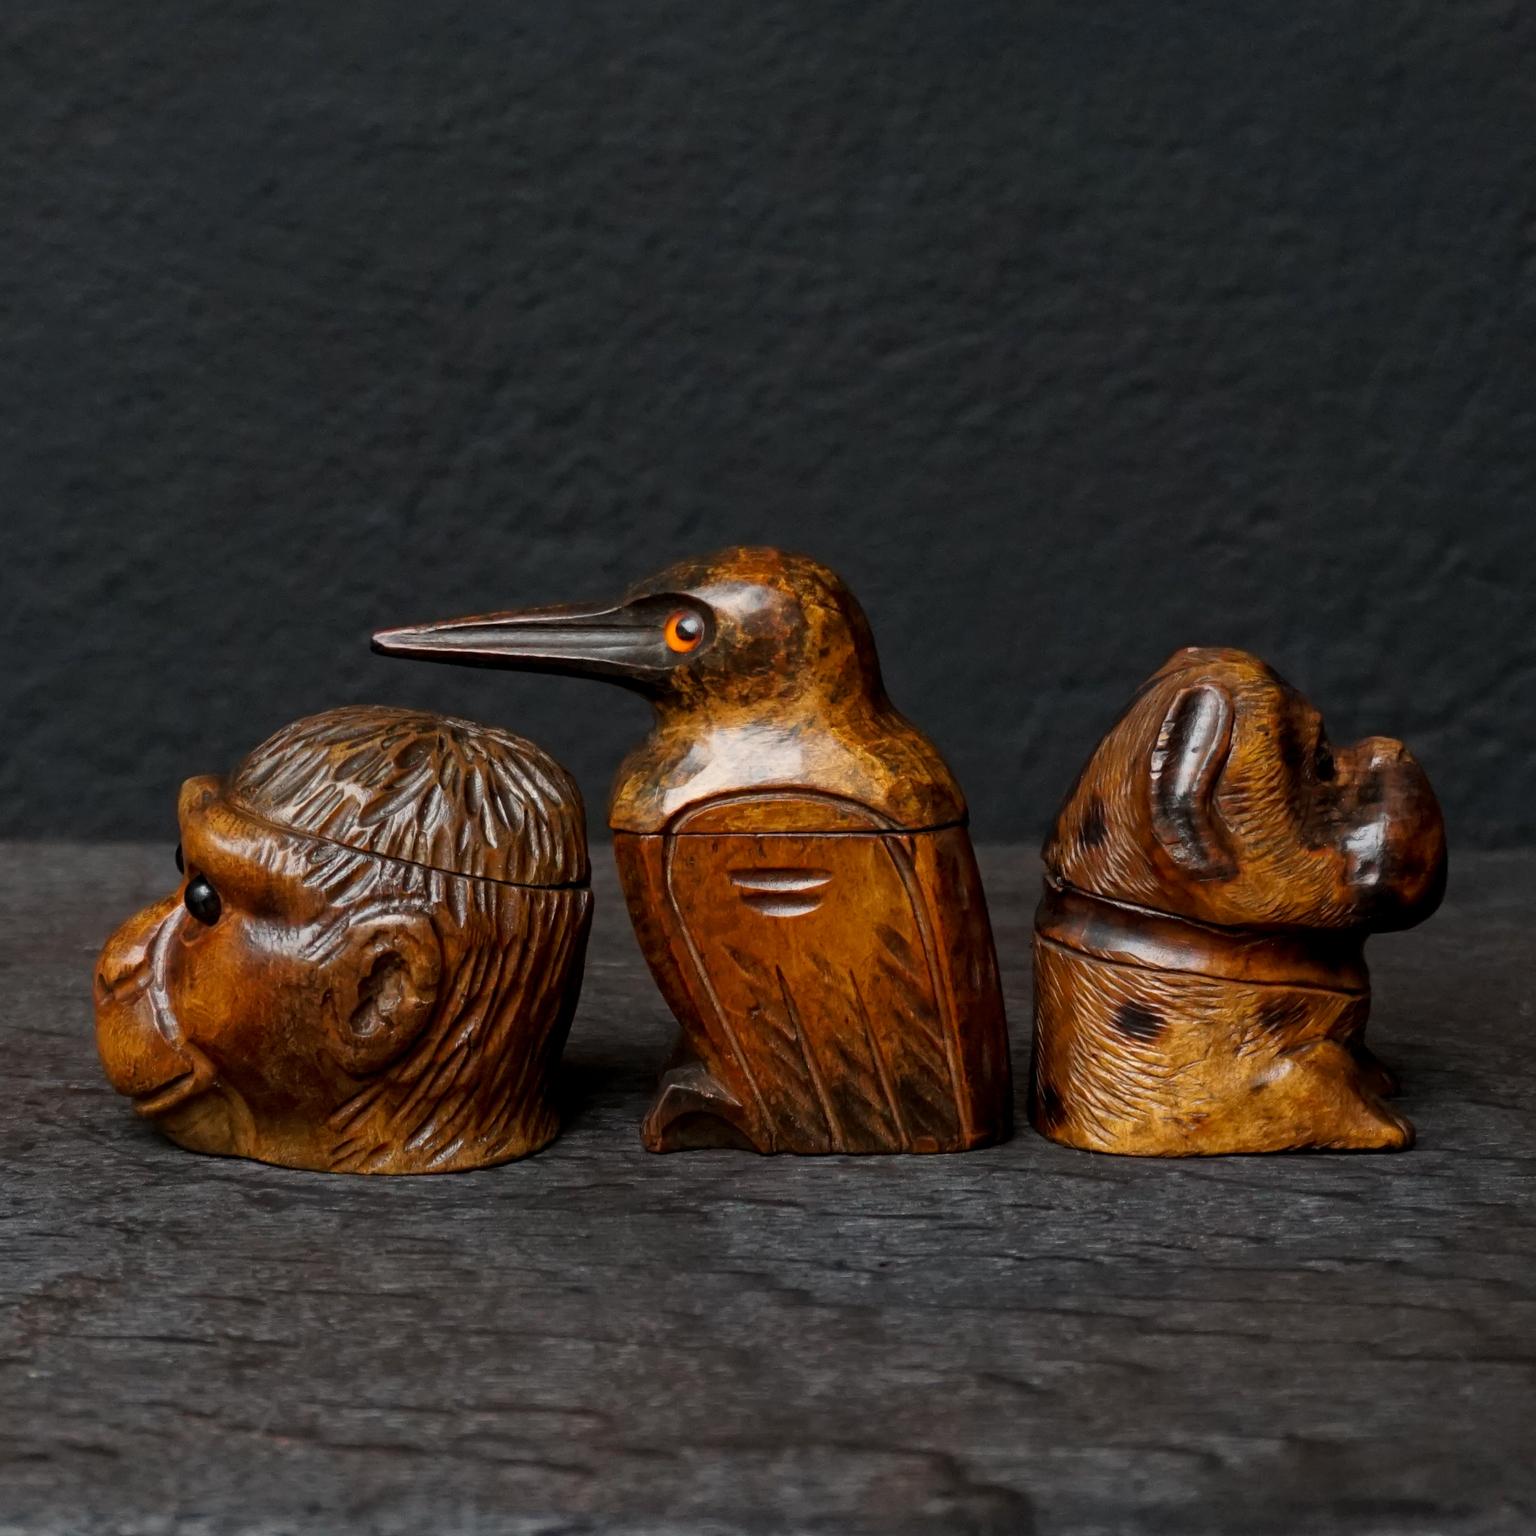 Set of three antique Black Forest hand carved walnut wood hinged ink wells with glass insert eyes.
Made during the mid-late 1800s, in the Brienz area of Switzerland.

I have seen a lot of Black Forest or Schwarzwald carved dogs and bears, but a